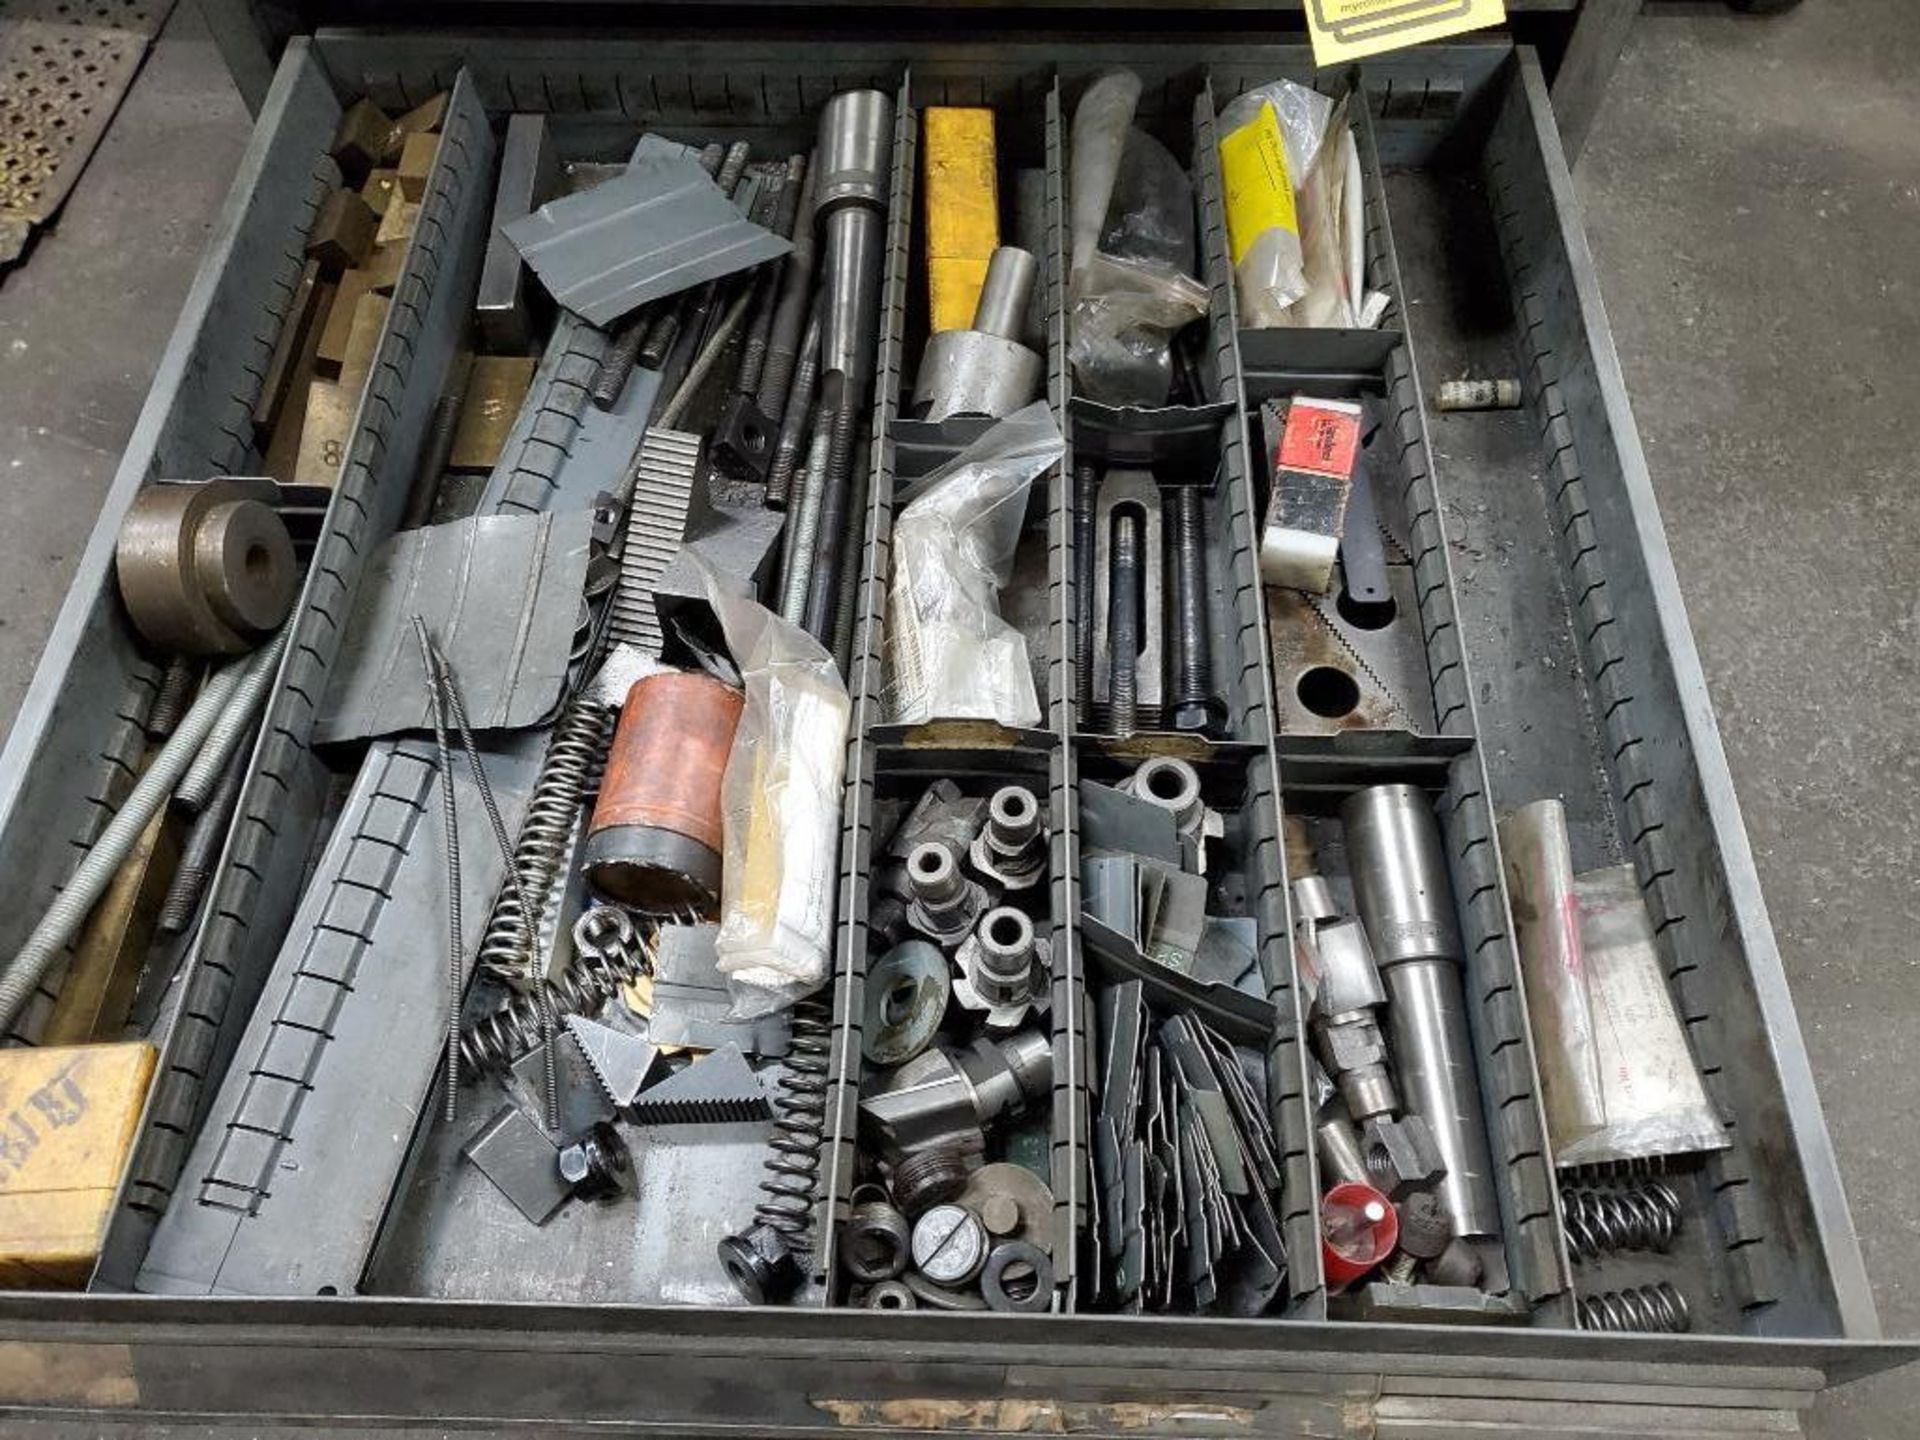 9-Drawer Modular Tool Cabinet Full Of Tooling & Accessories; Drills, Flutes, Drills, End Mills, Ream - Image 11 of 13